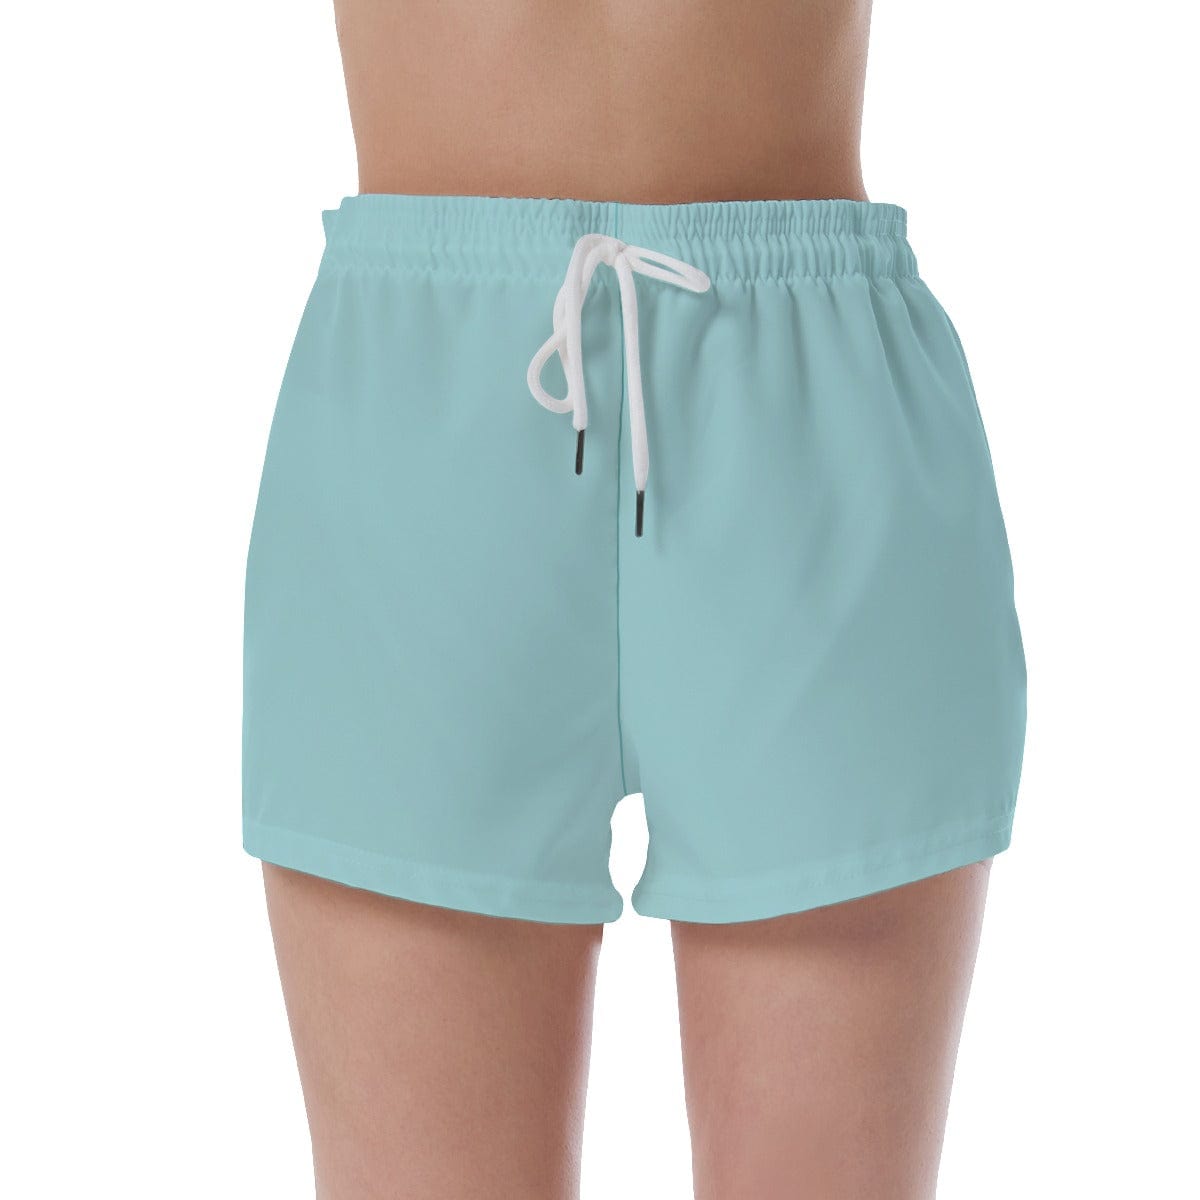 Yoycol 2XL / Teal Hibiscus Cove Teal - Women's Short Pants